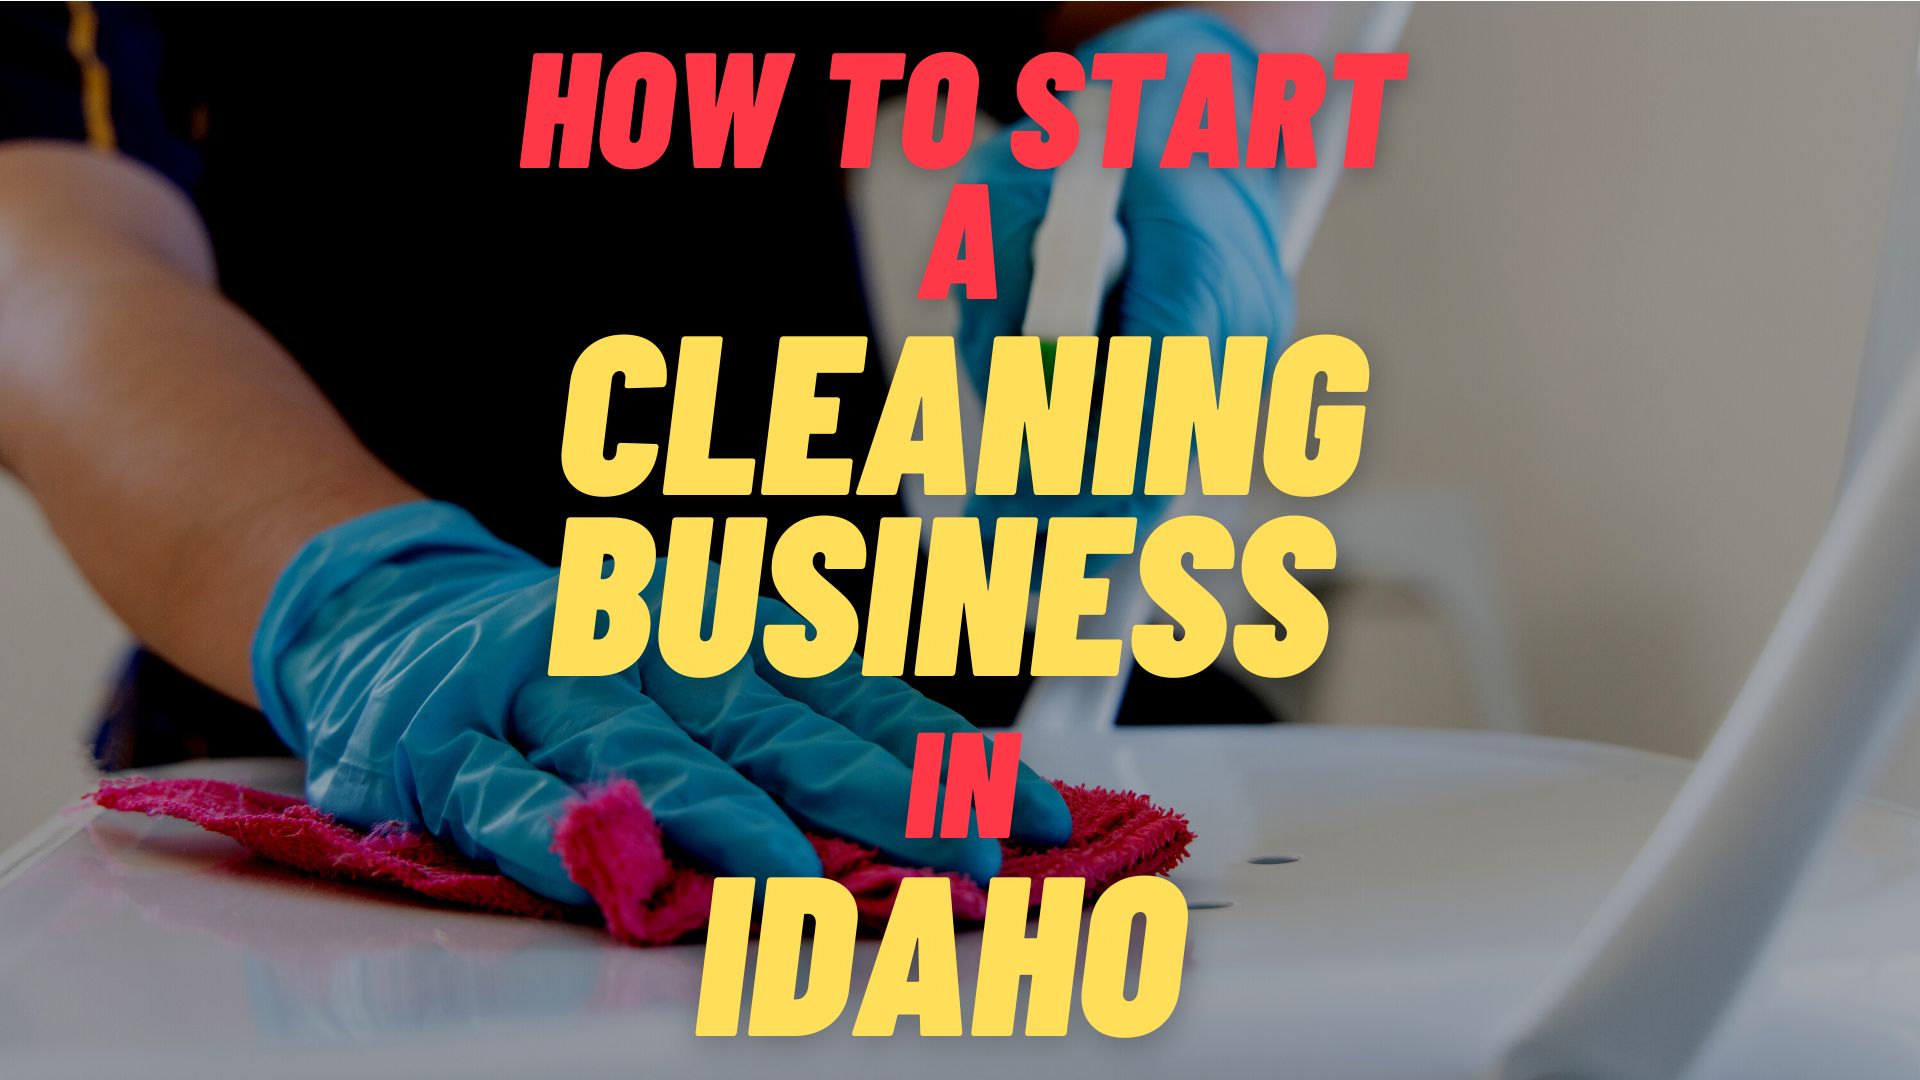 start a cleaning business in Idaho